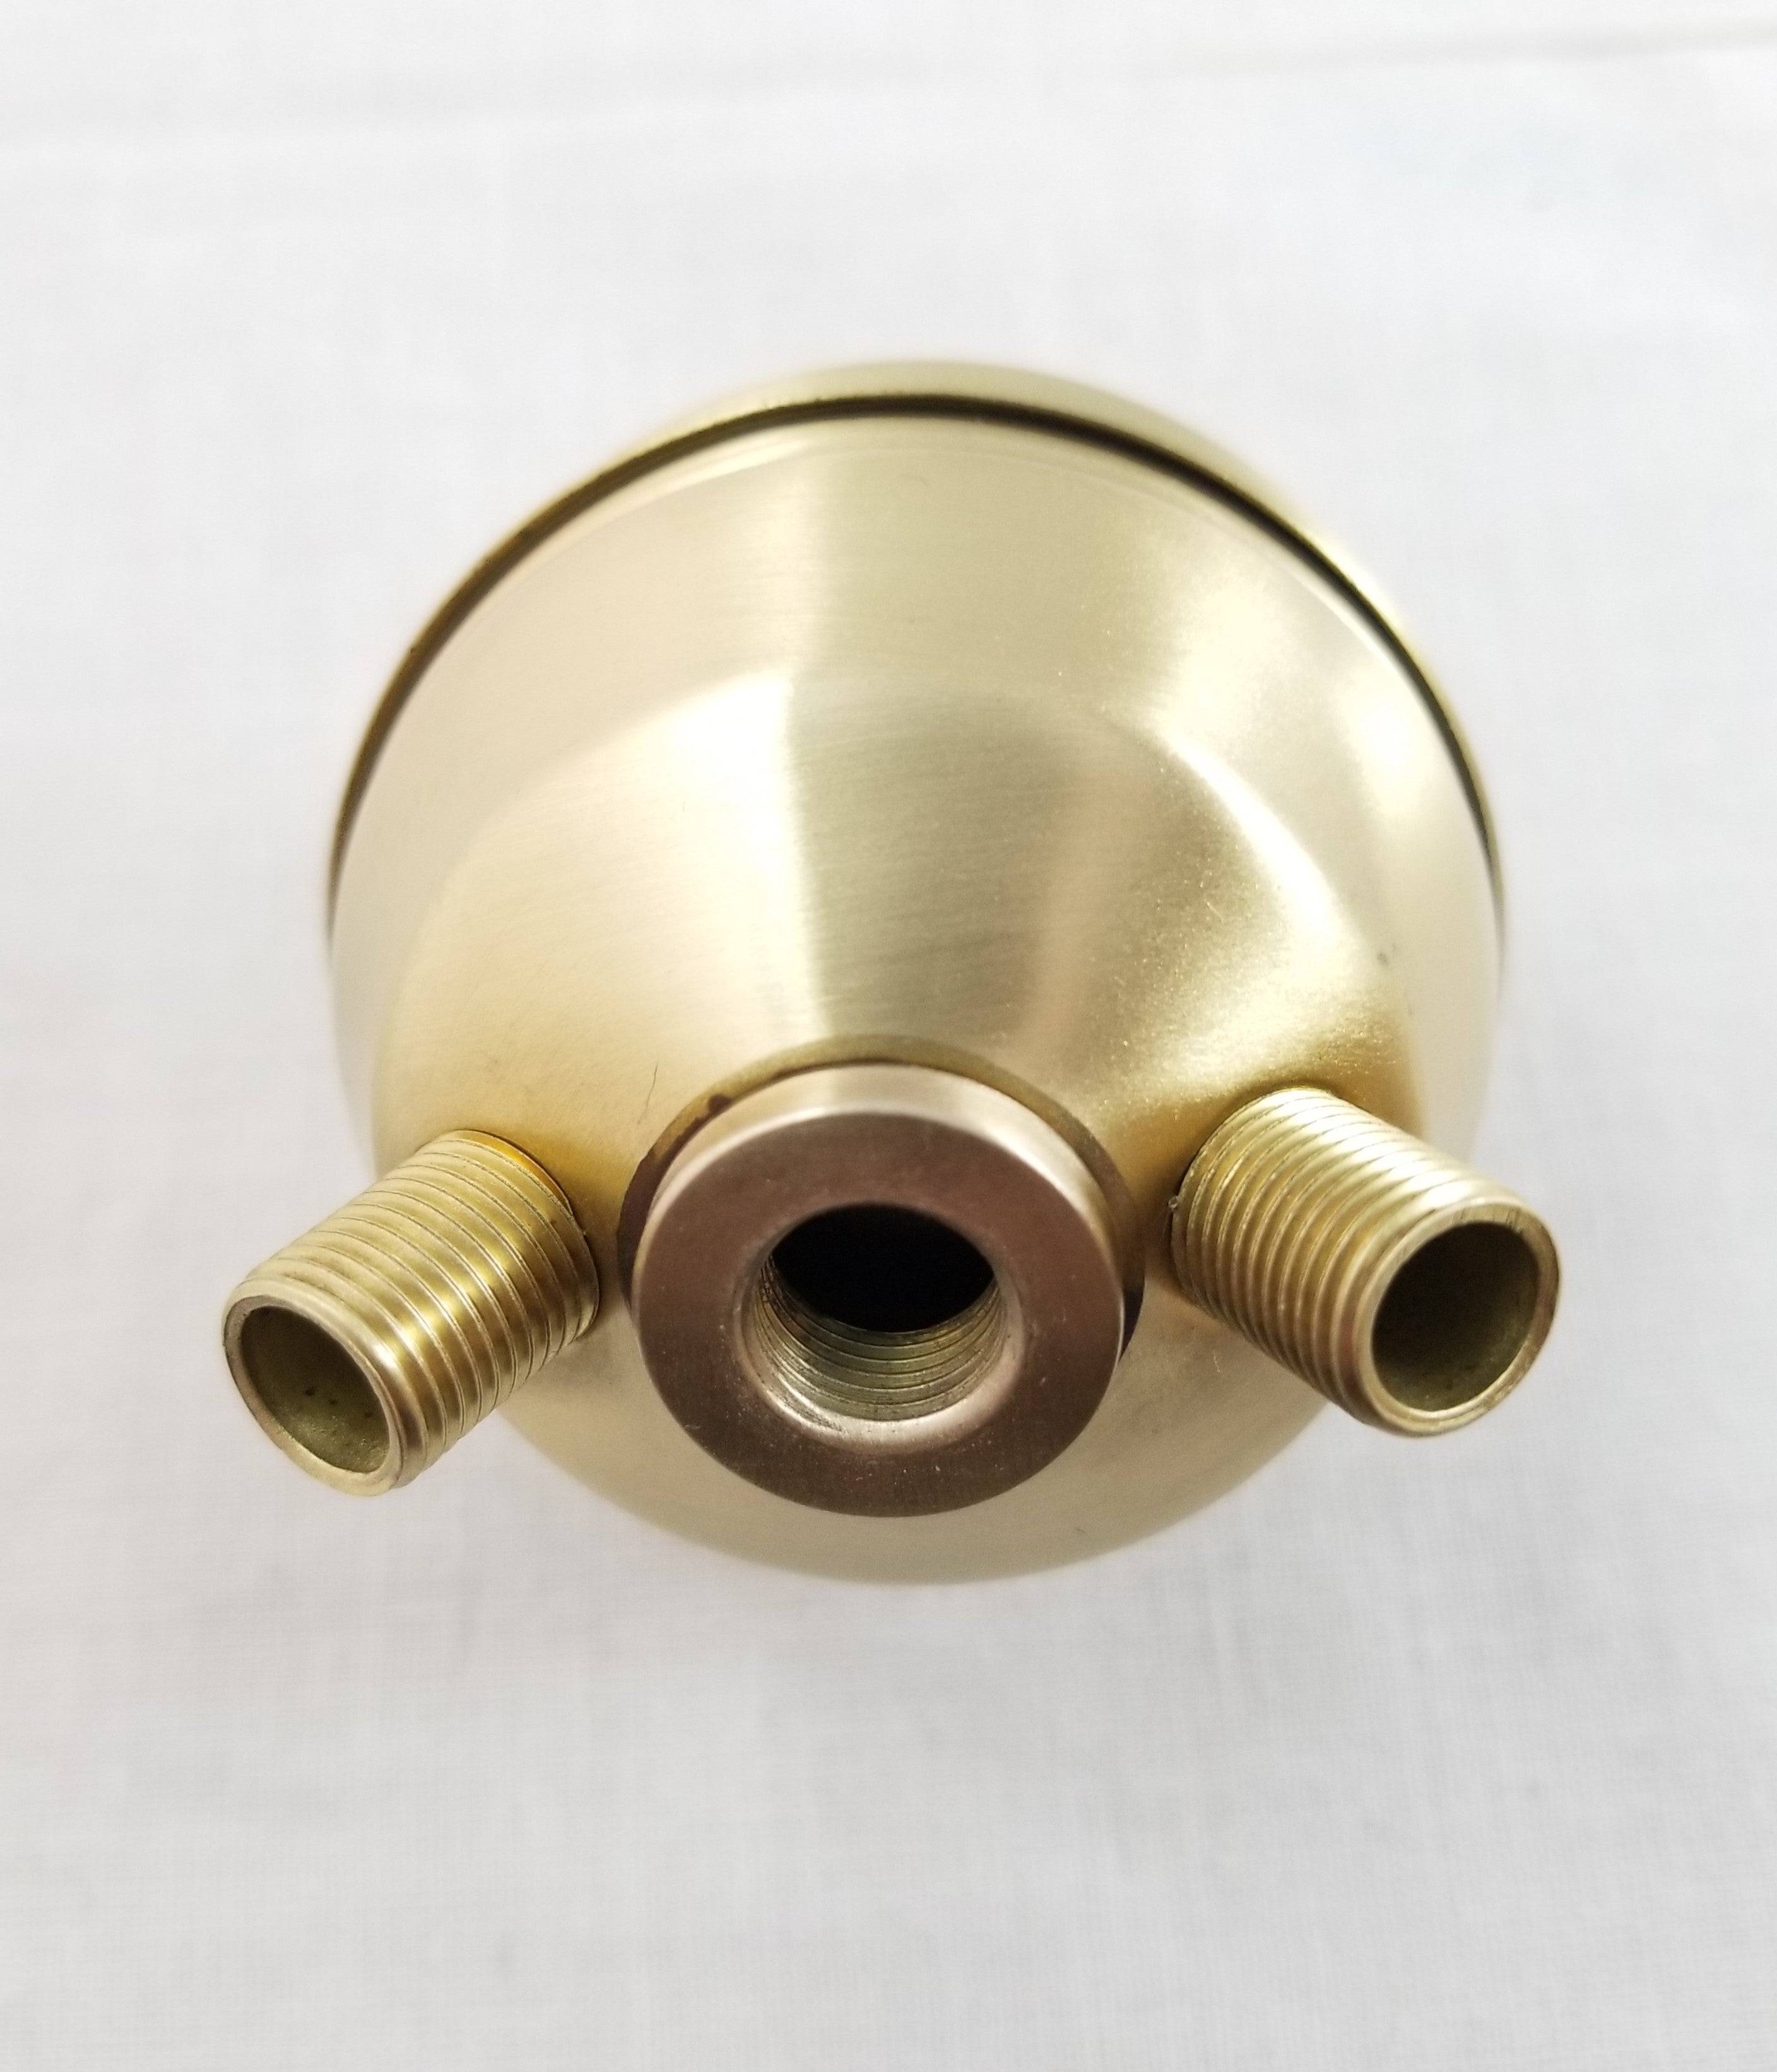 Cluster Head - Solid Brushed Brass - Bottom Tapped 1/8 IP - Less Finial